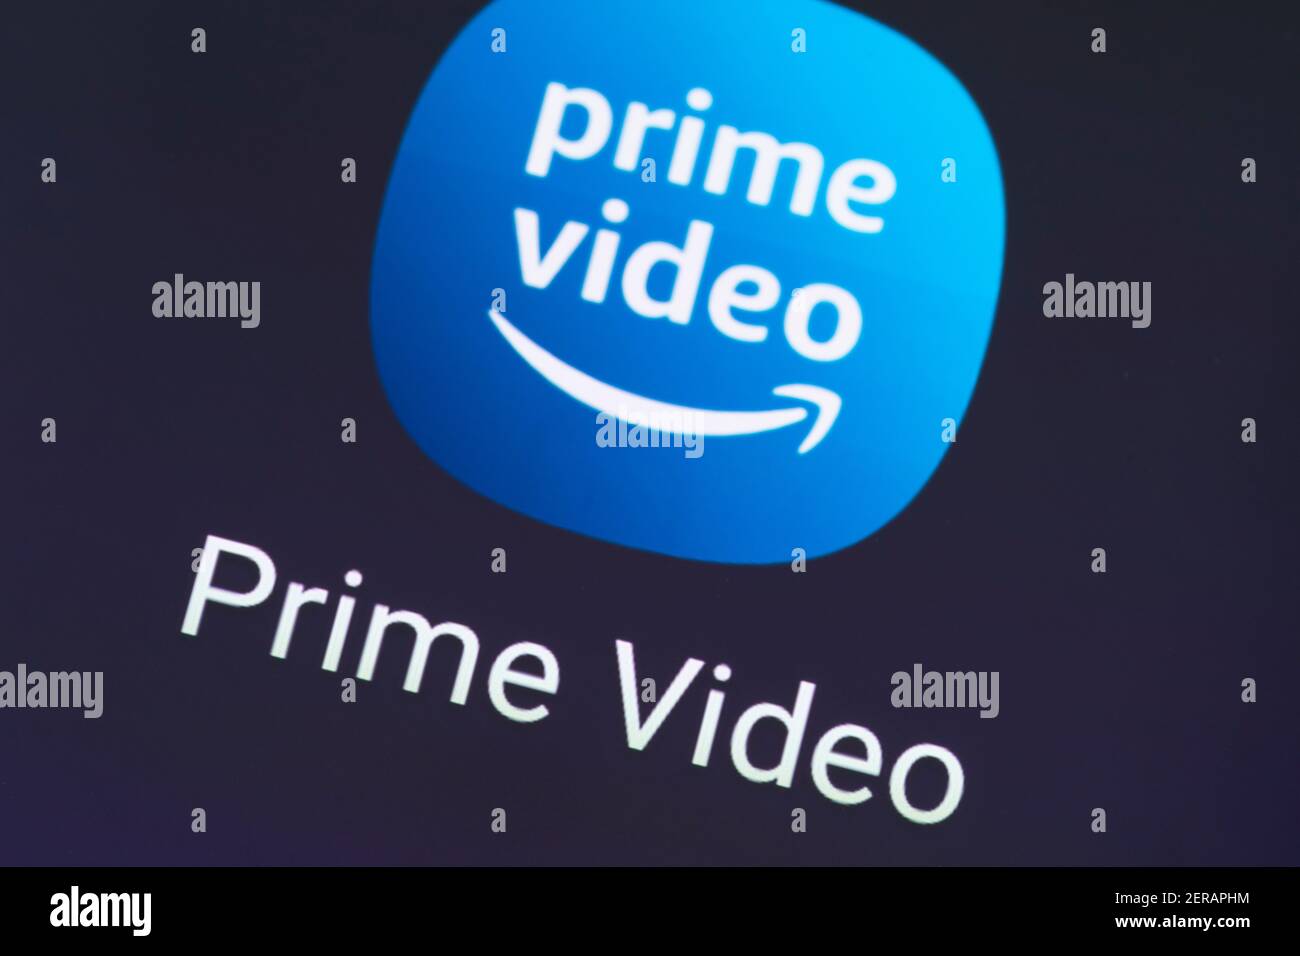 amazon prime video is a subscription video on demand